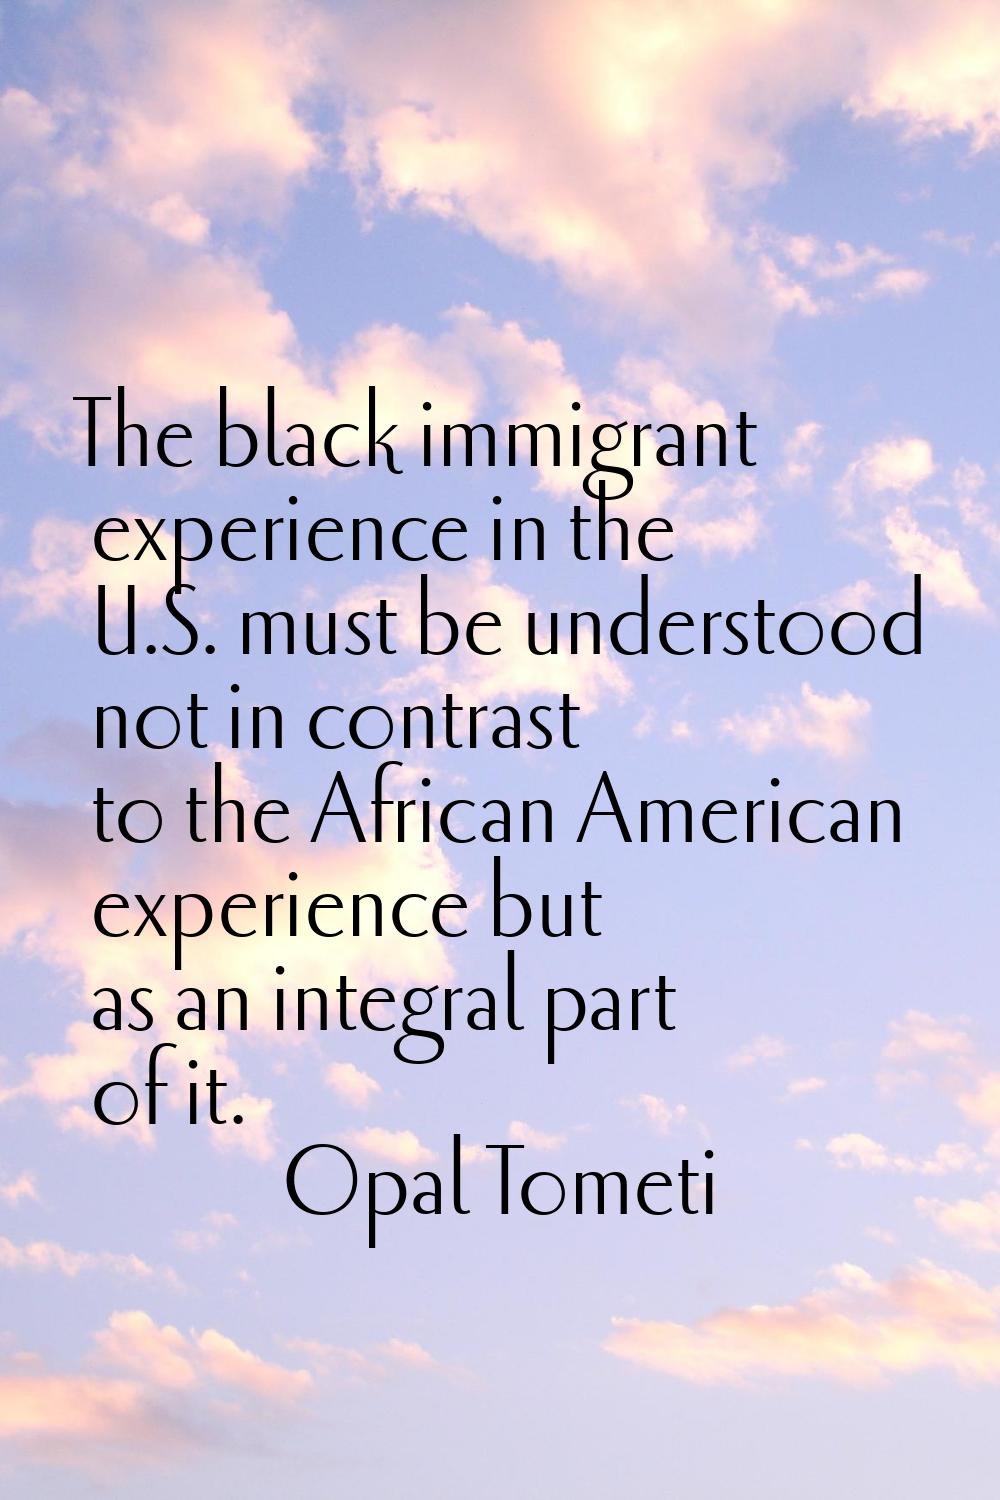 The black immigrant experience in the U.S. must be understood not in contrast to the African Americ